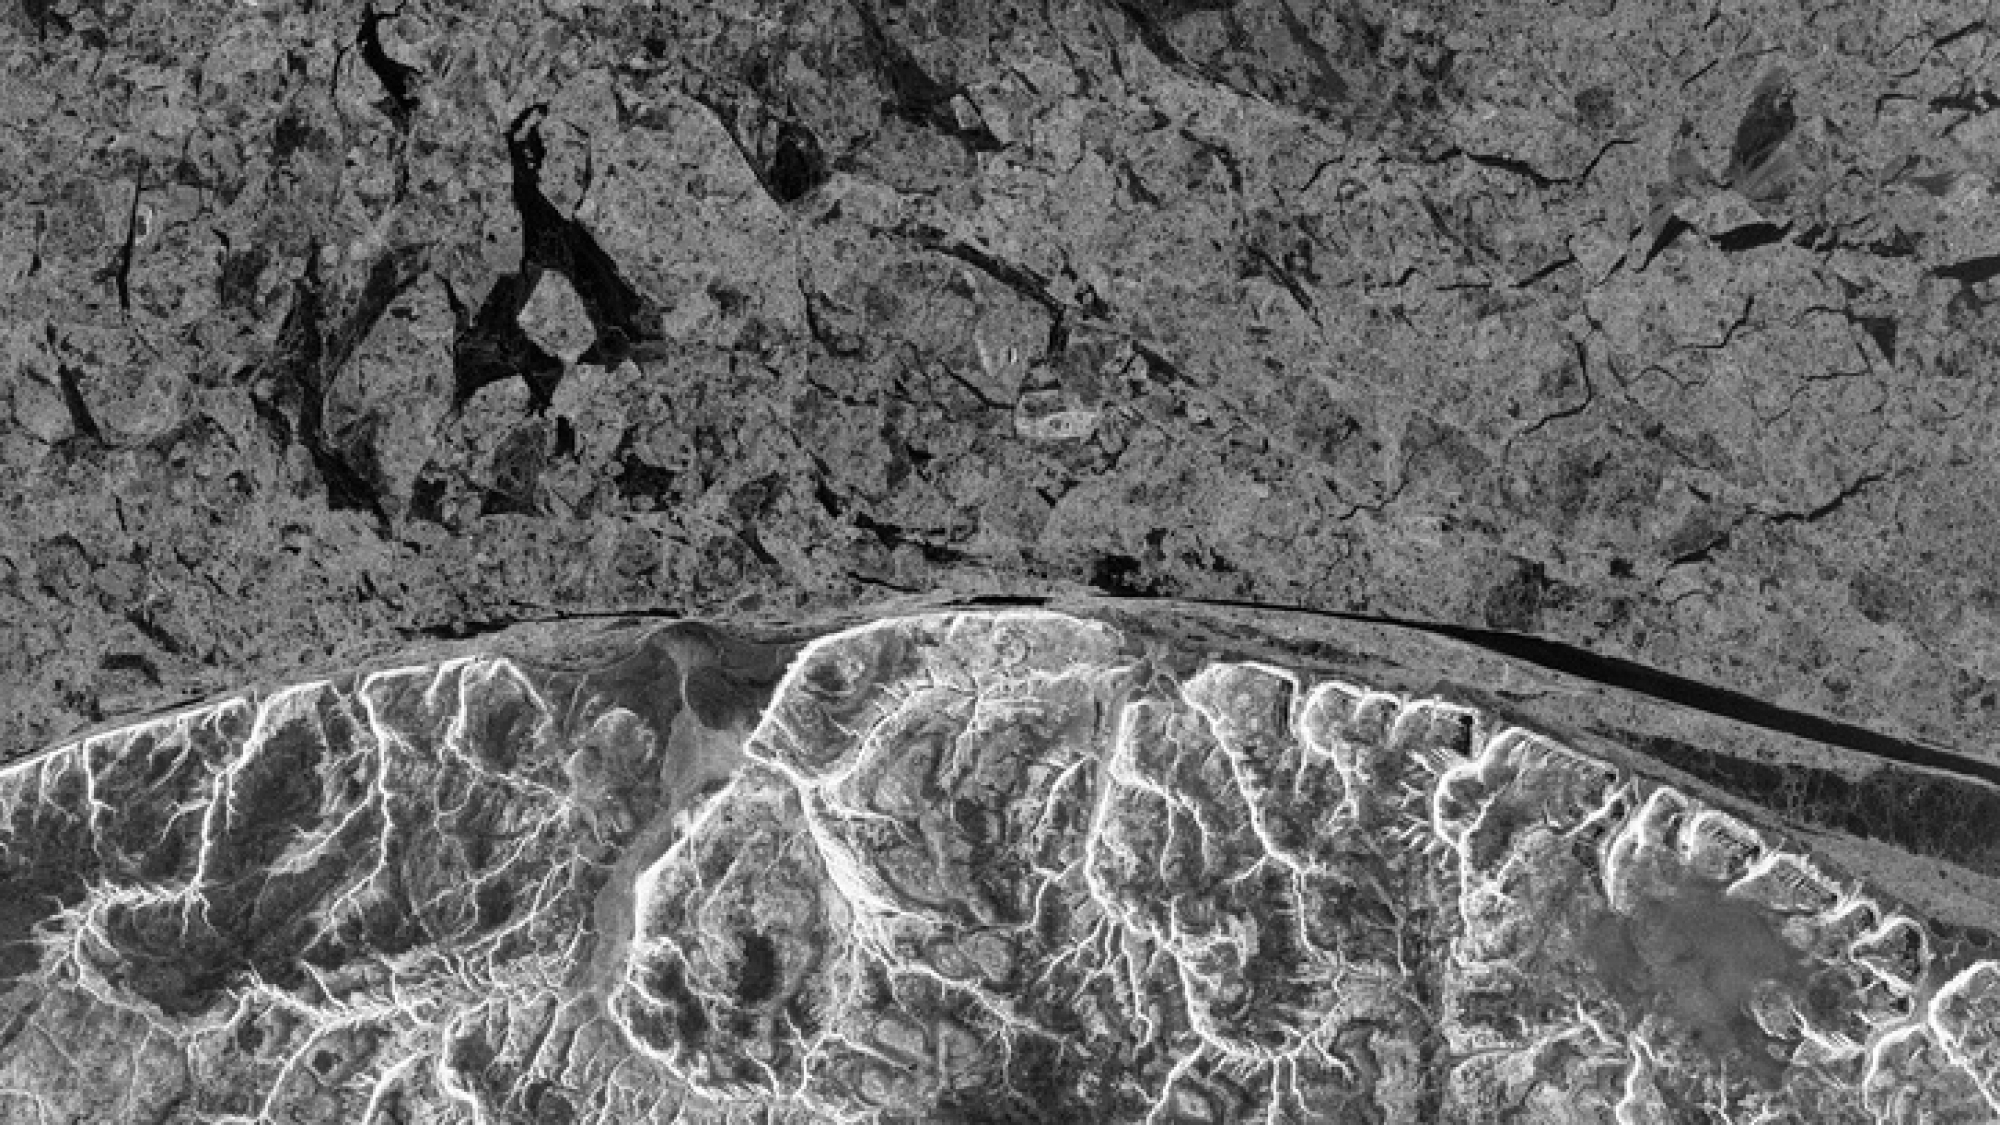 Northwest Passage sea ice contrasts with the coast of Baffin Island, Canada, in this ALOS-PALSAR image taken 8 March 2011. © JAXA, METI 2011